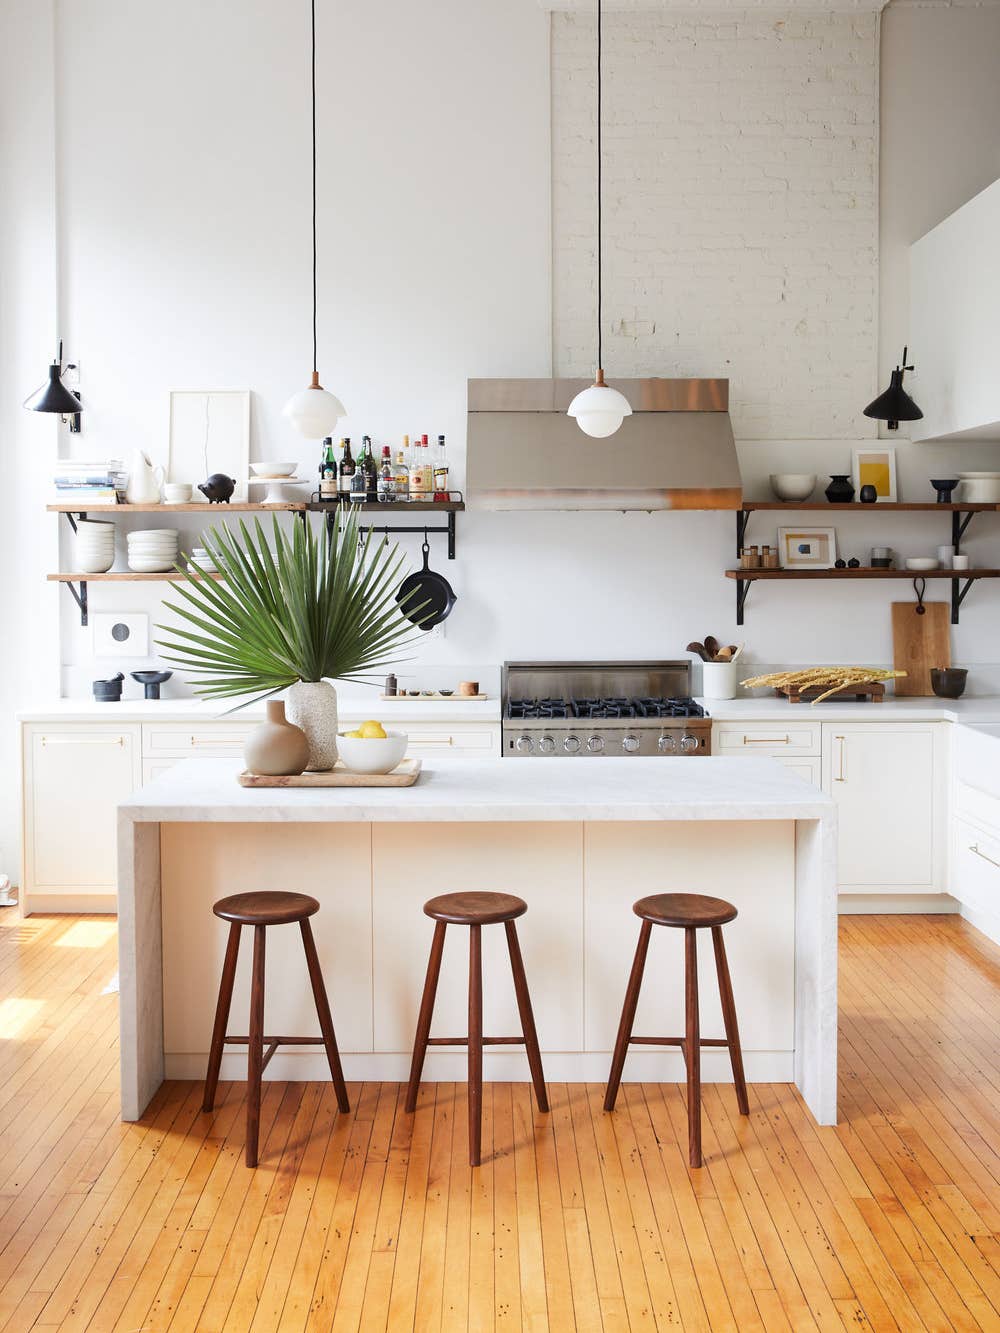 27 Stunning Kitchens That Belong on Your Pinterest Board